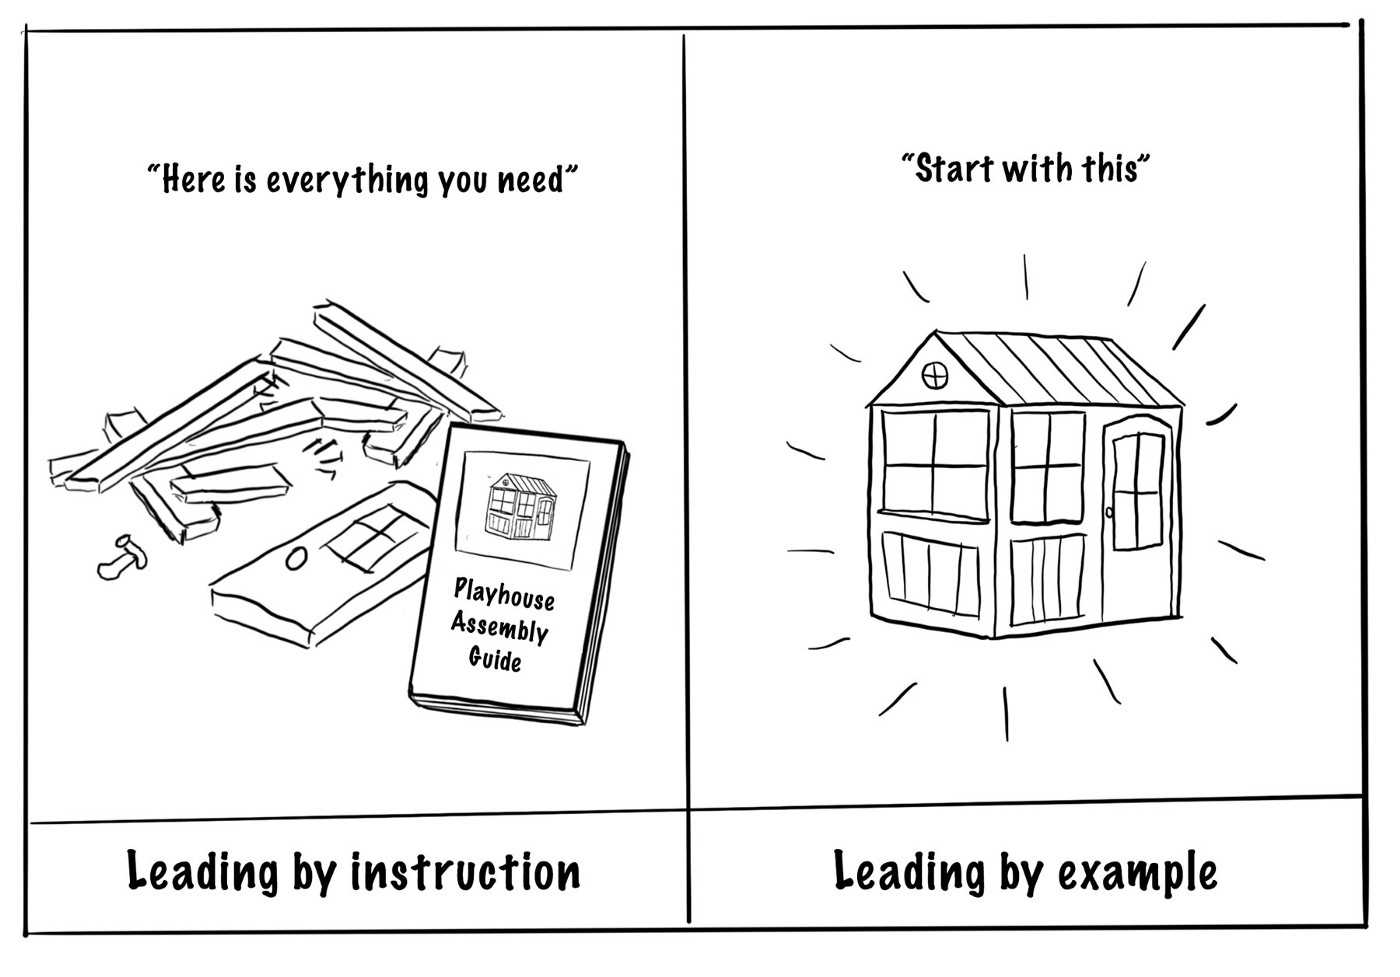 Leading by example vs leading by instruction